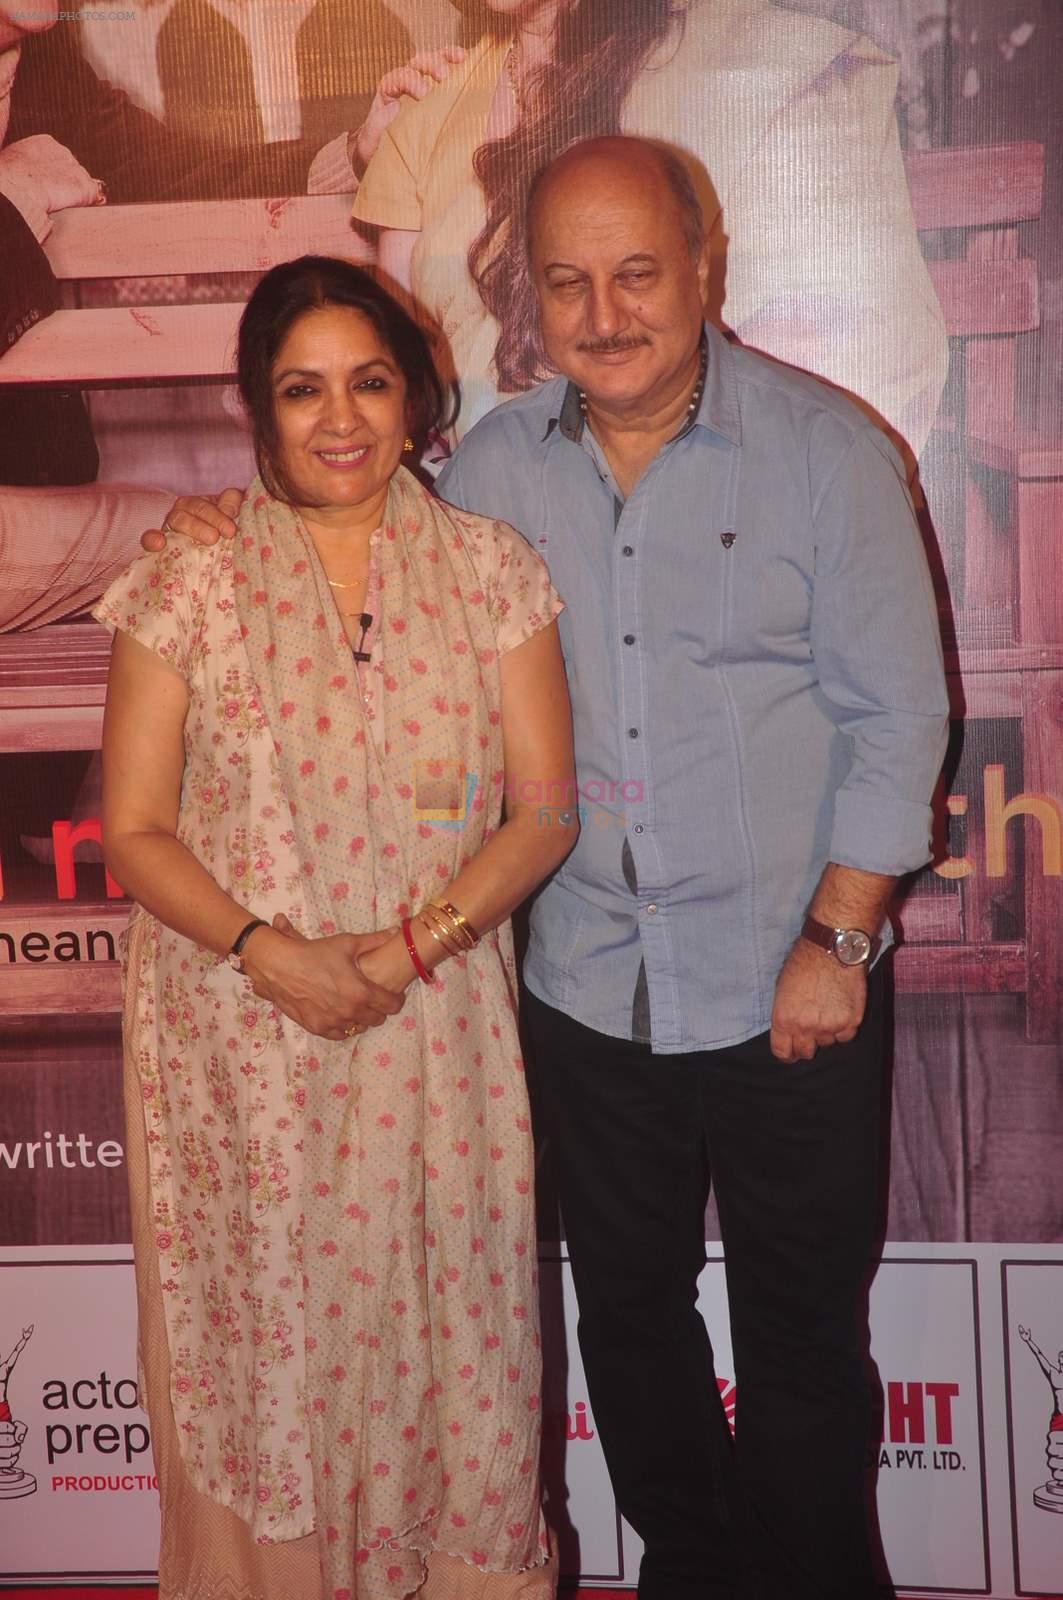 Anupam and Neena Gupta's play premiere in NCPA on 8th March 2015